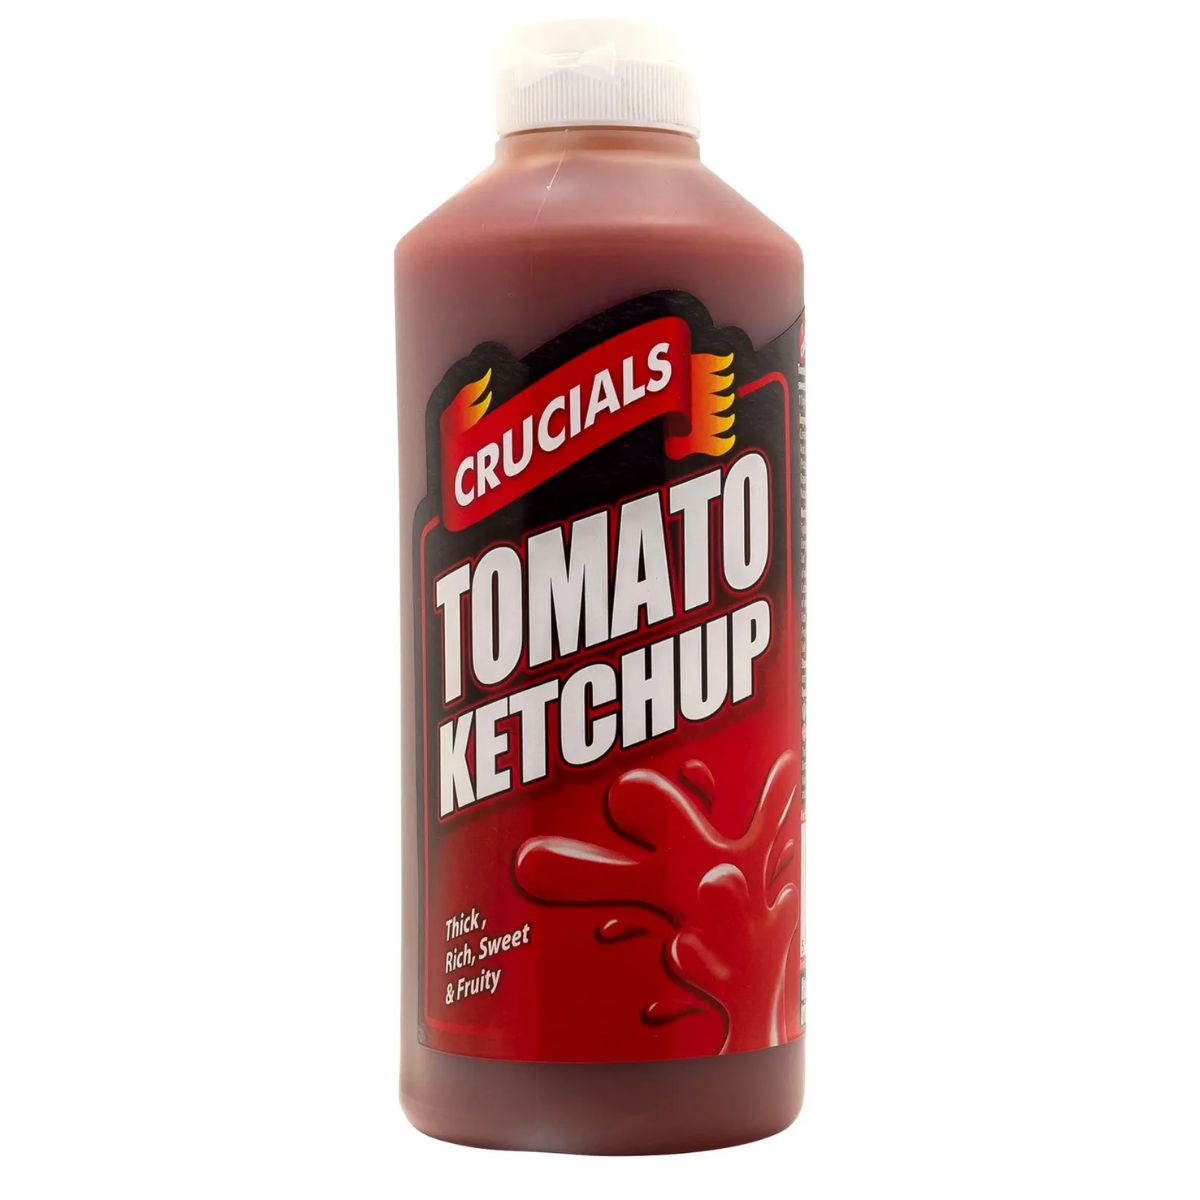 A bottle of Crucials - Tomato Ketchup - 500ml on a white background.